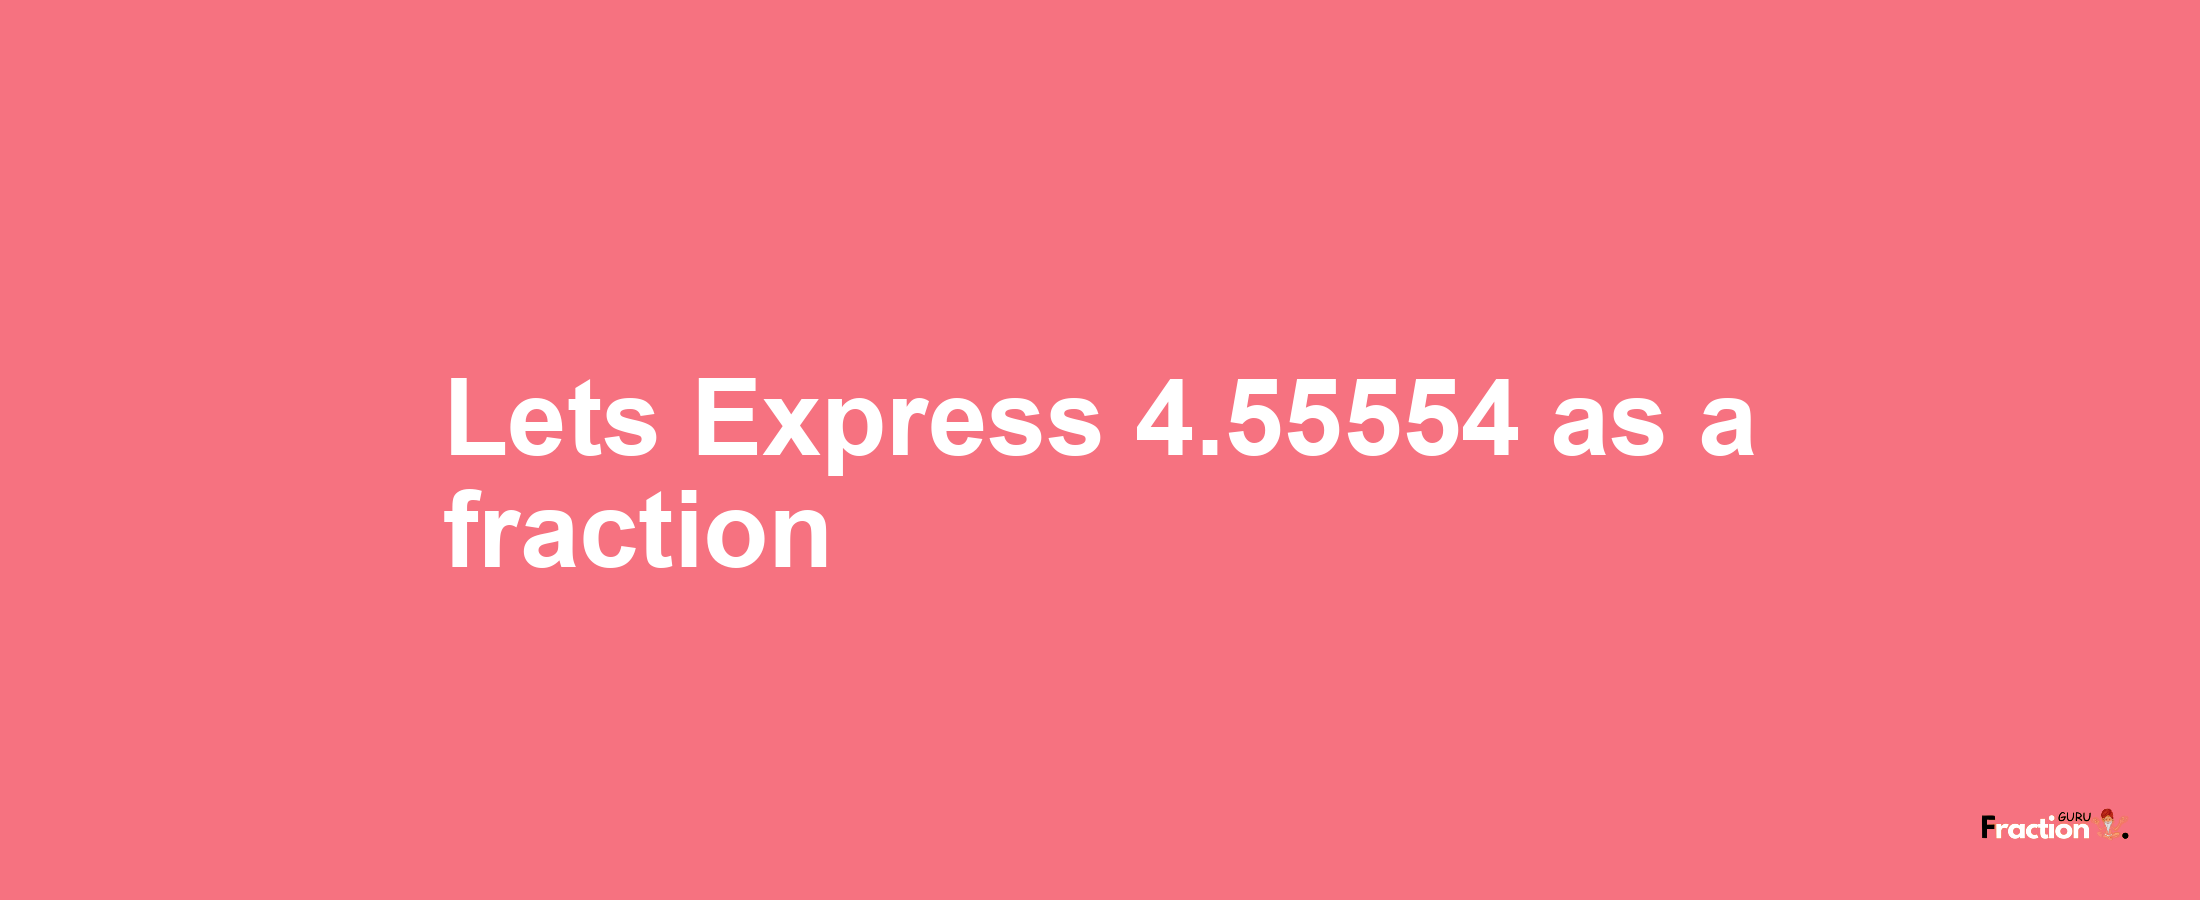 Lets Express 4.55554 as afraction